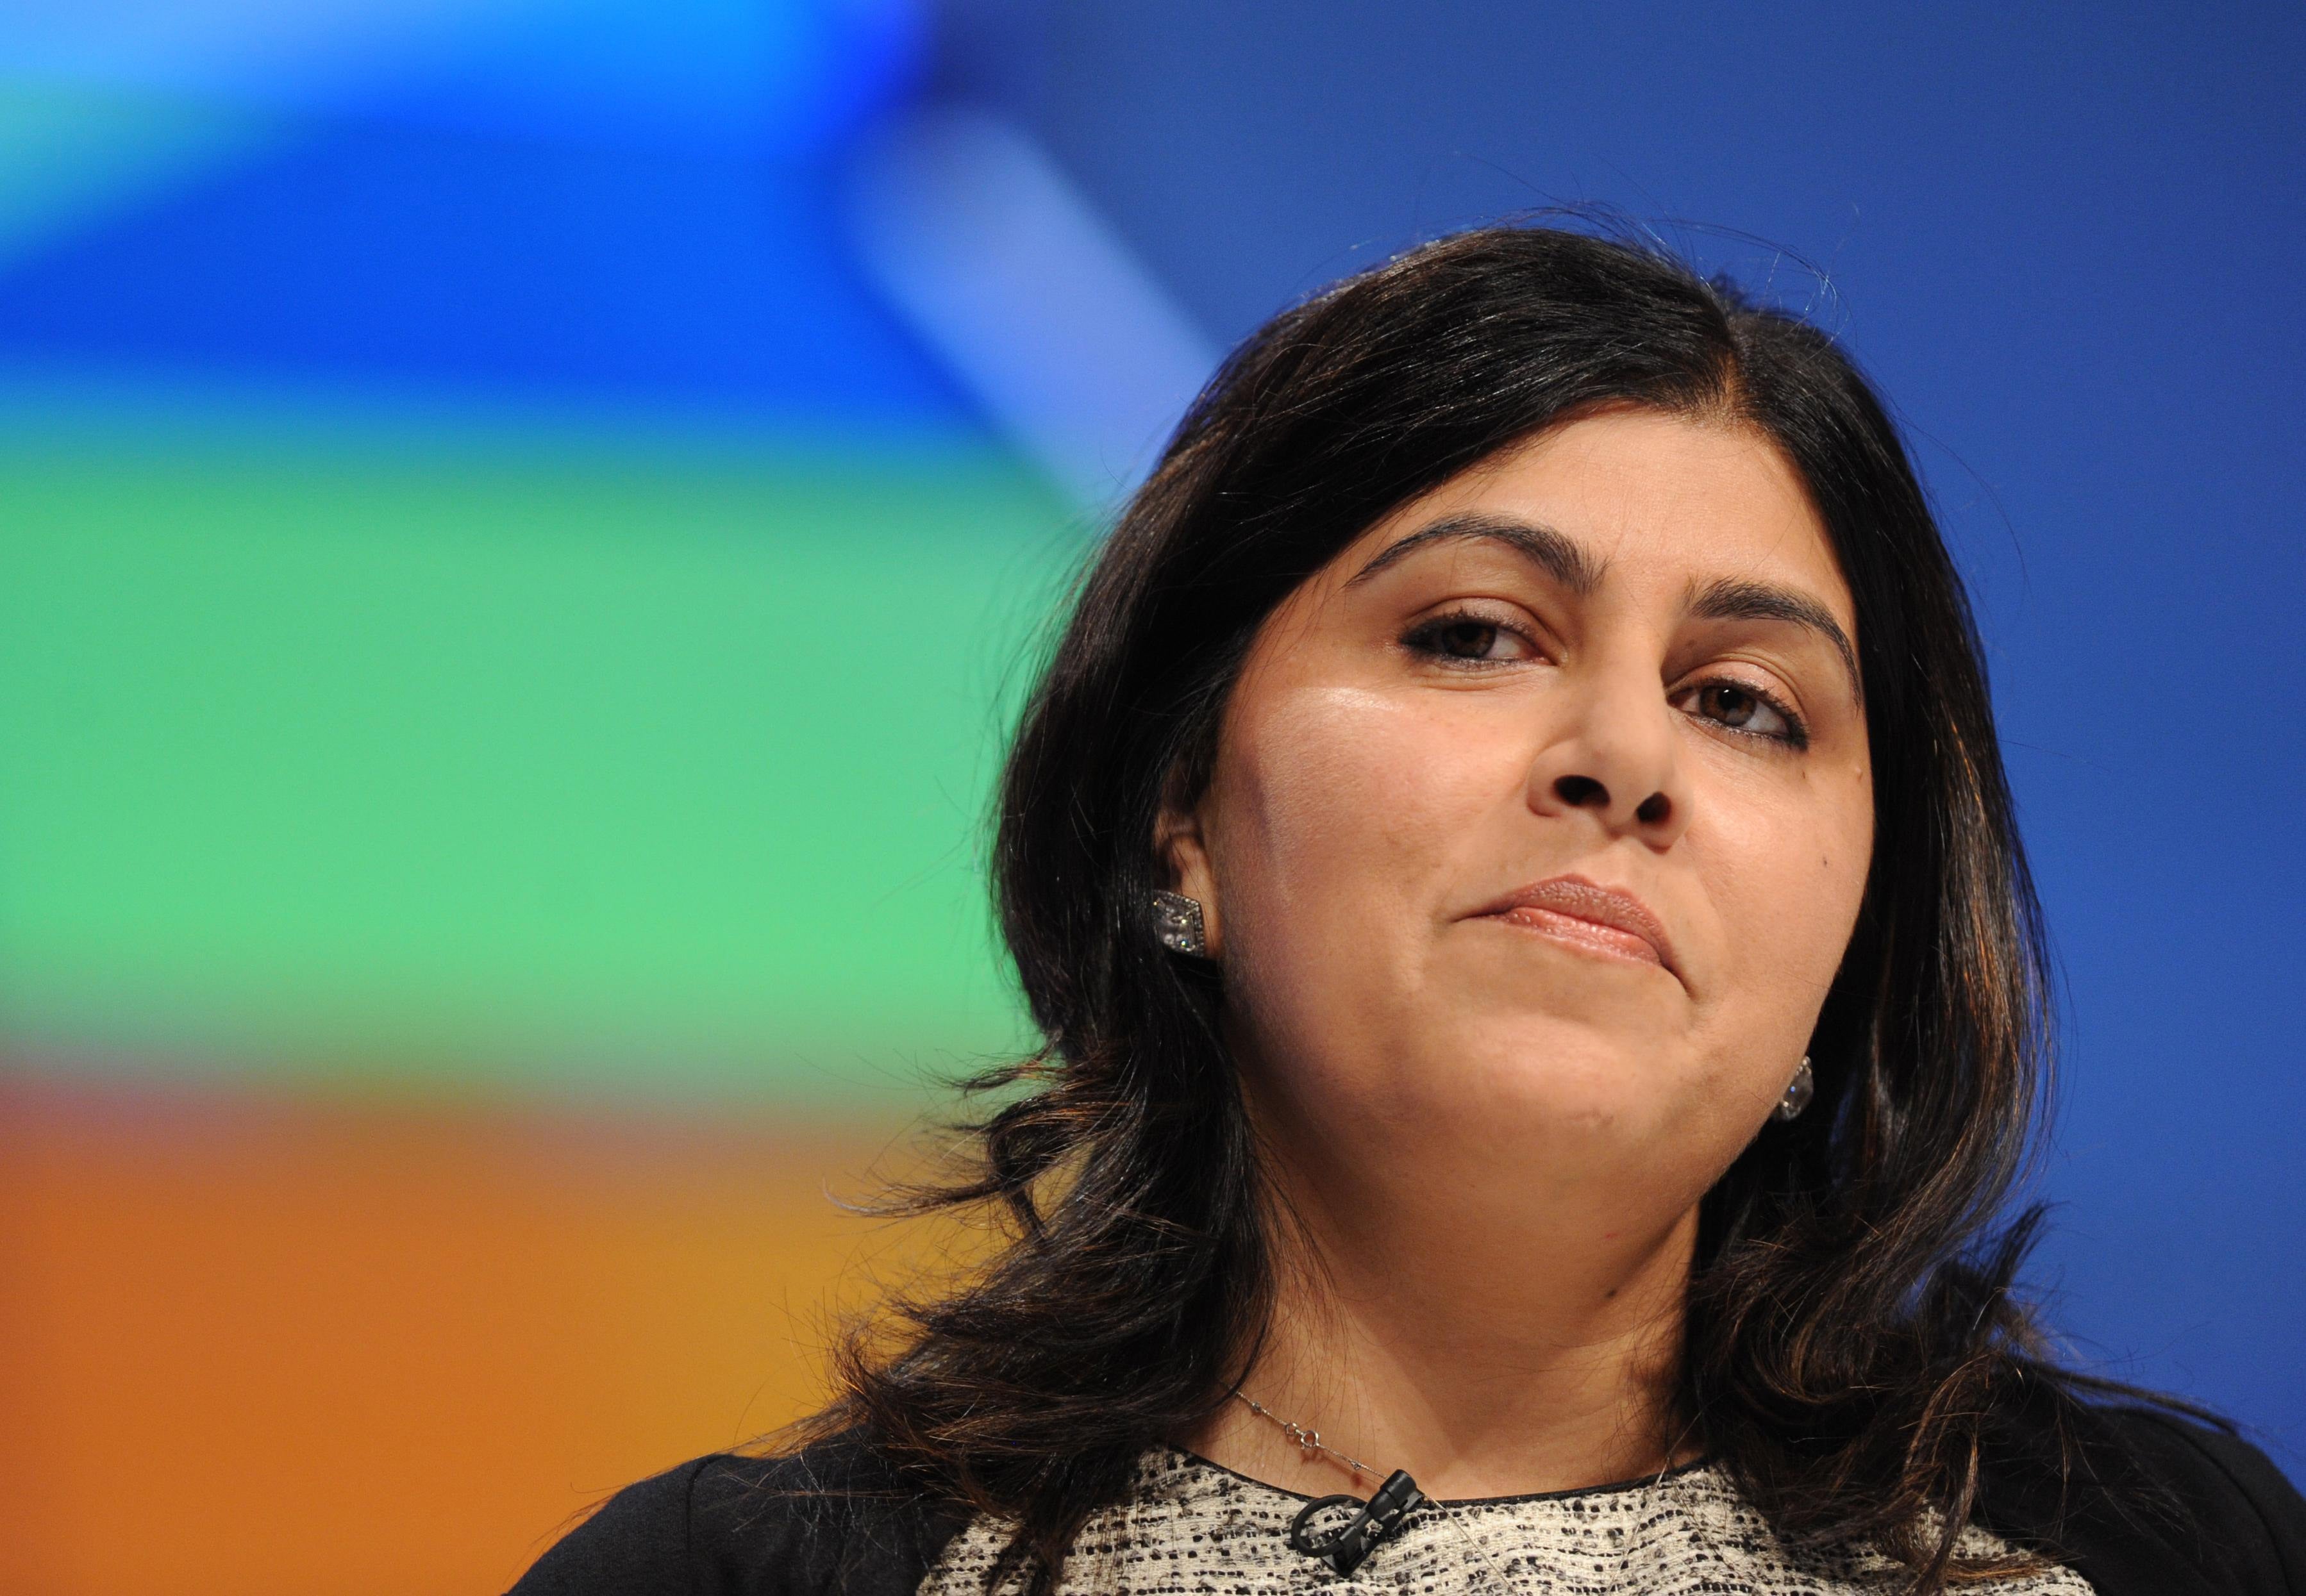 Baroness Warsi has been claiming for several years that the party has an issue with Islamophobia